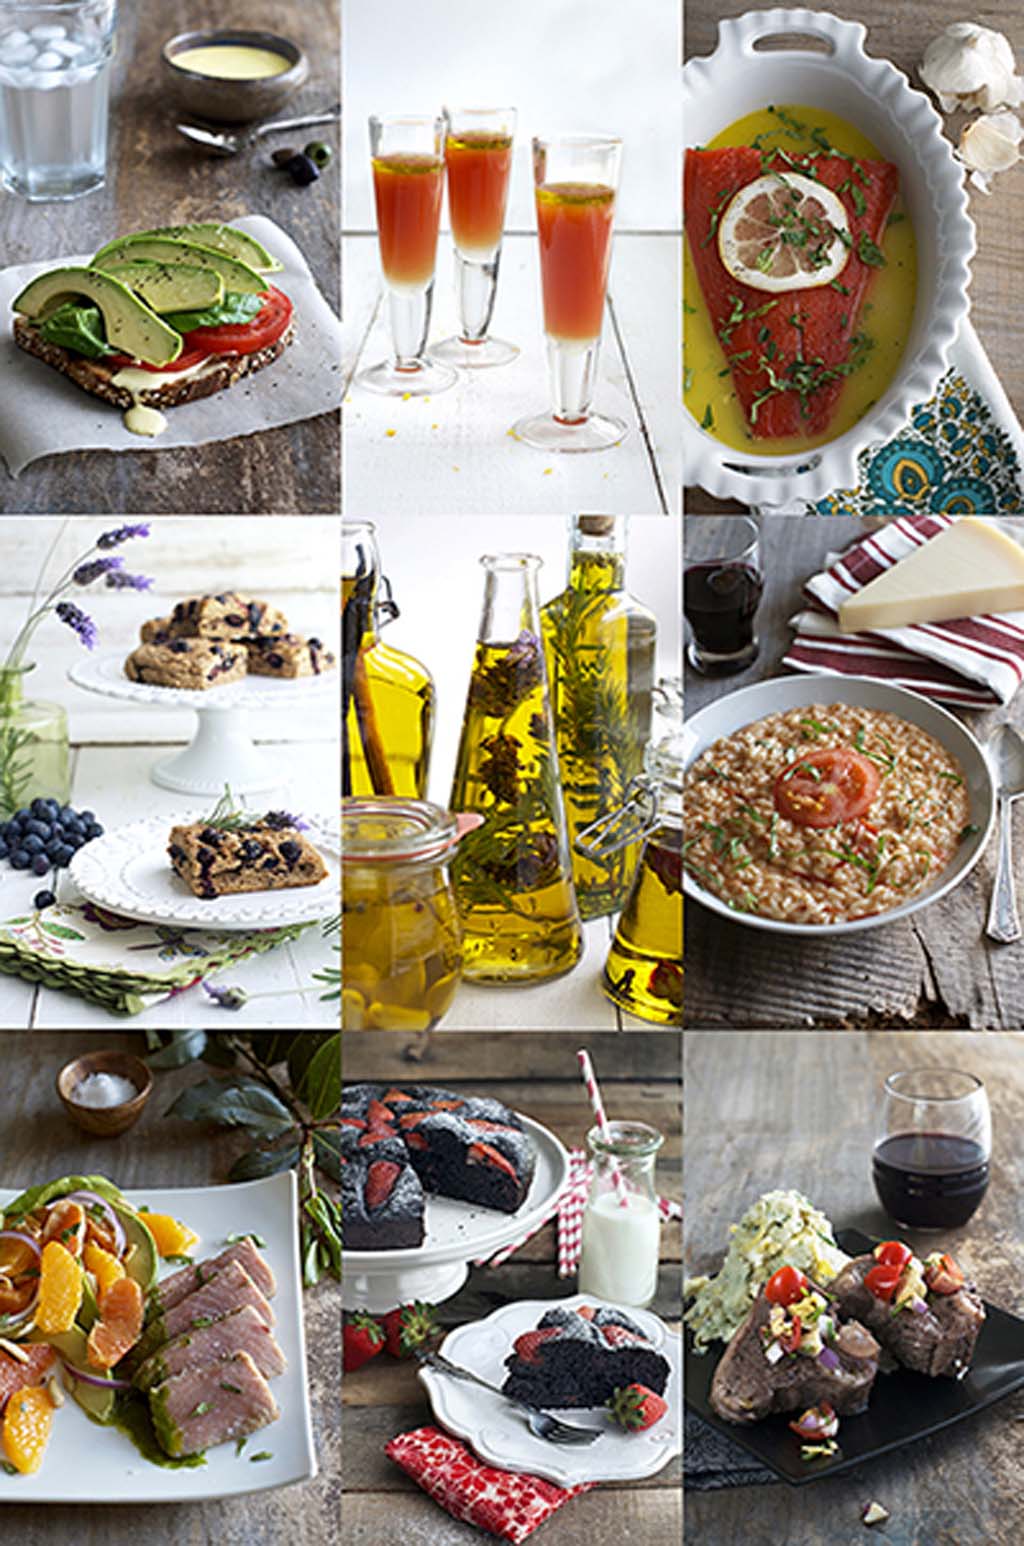 evoo_collage 1024